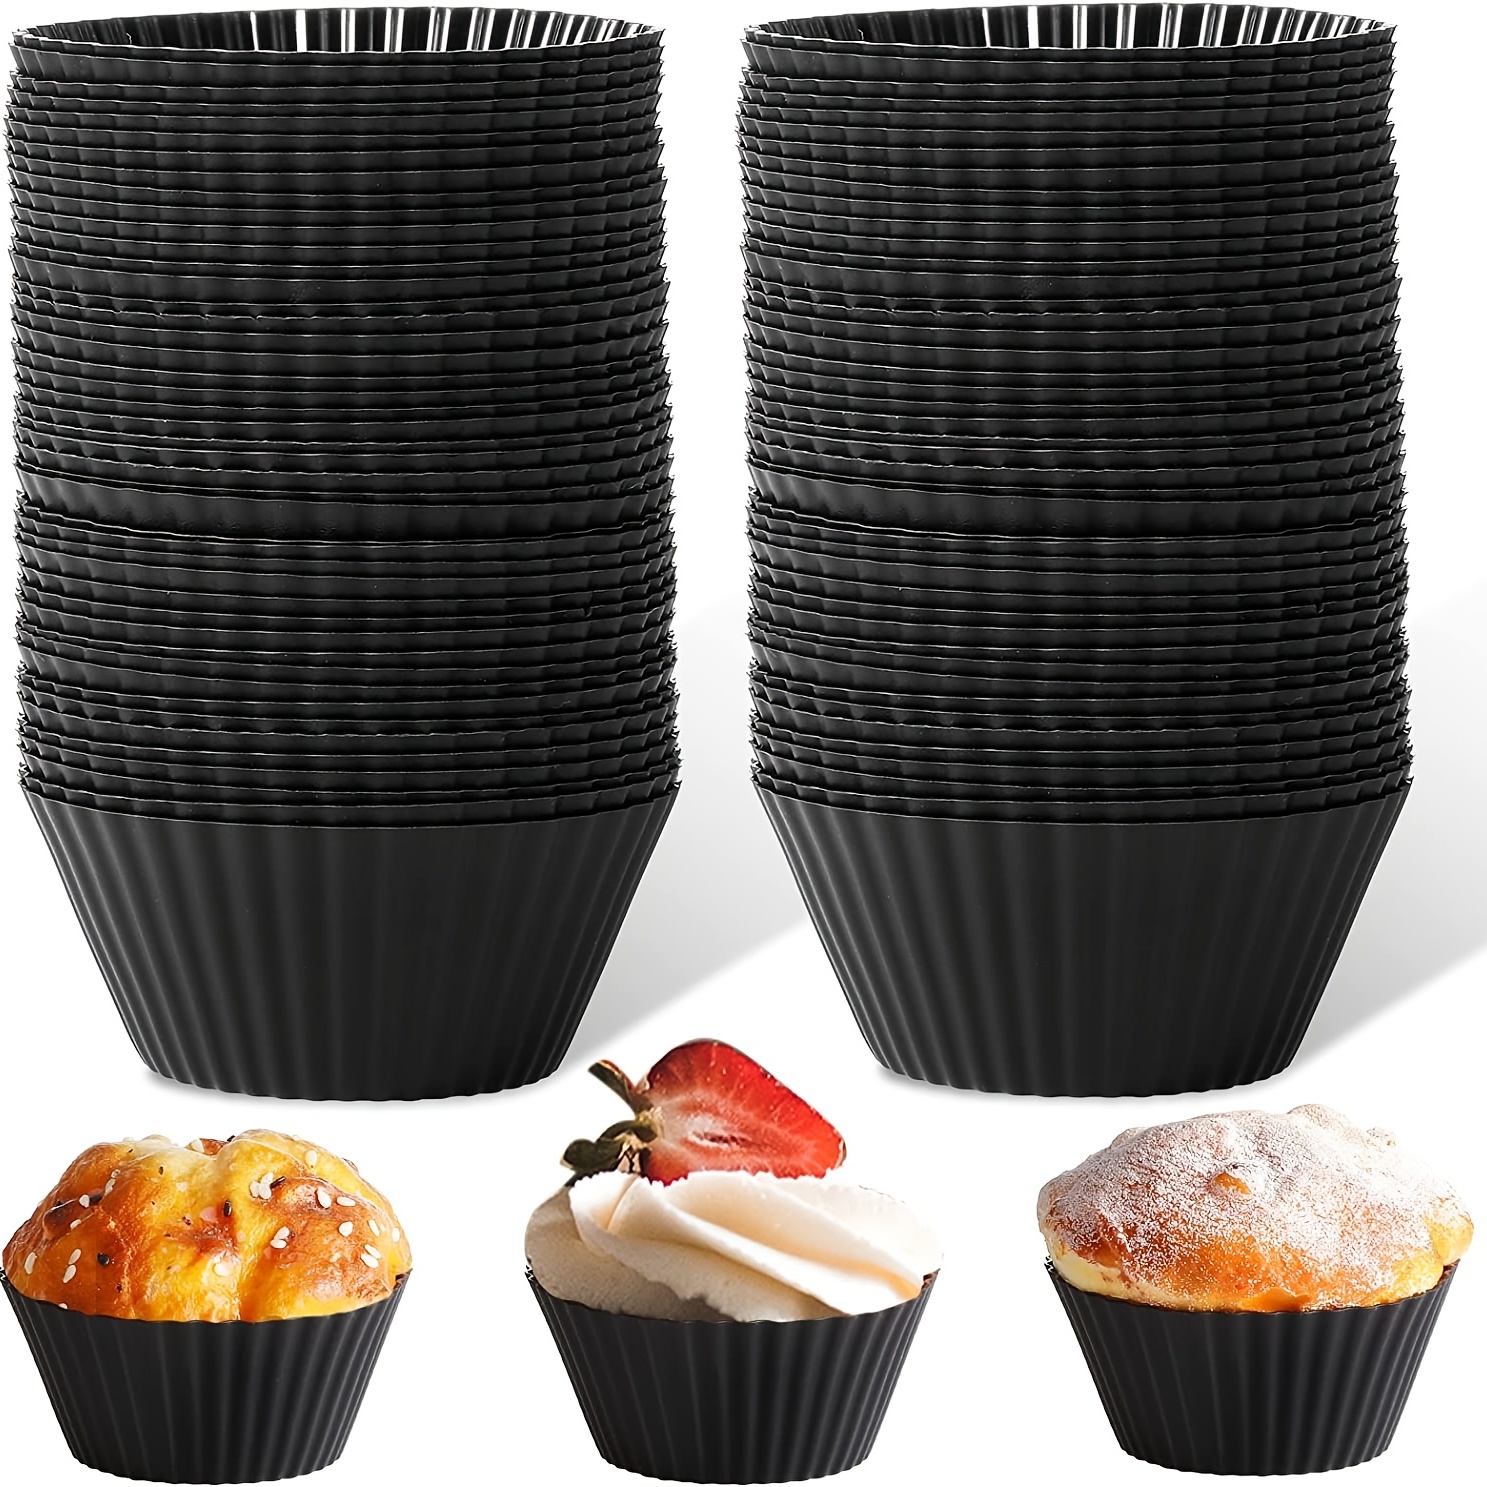 Reusable Silicone Baking Cups - AIGP1077 - IdeaStage Promotional Products